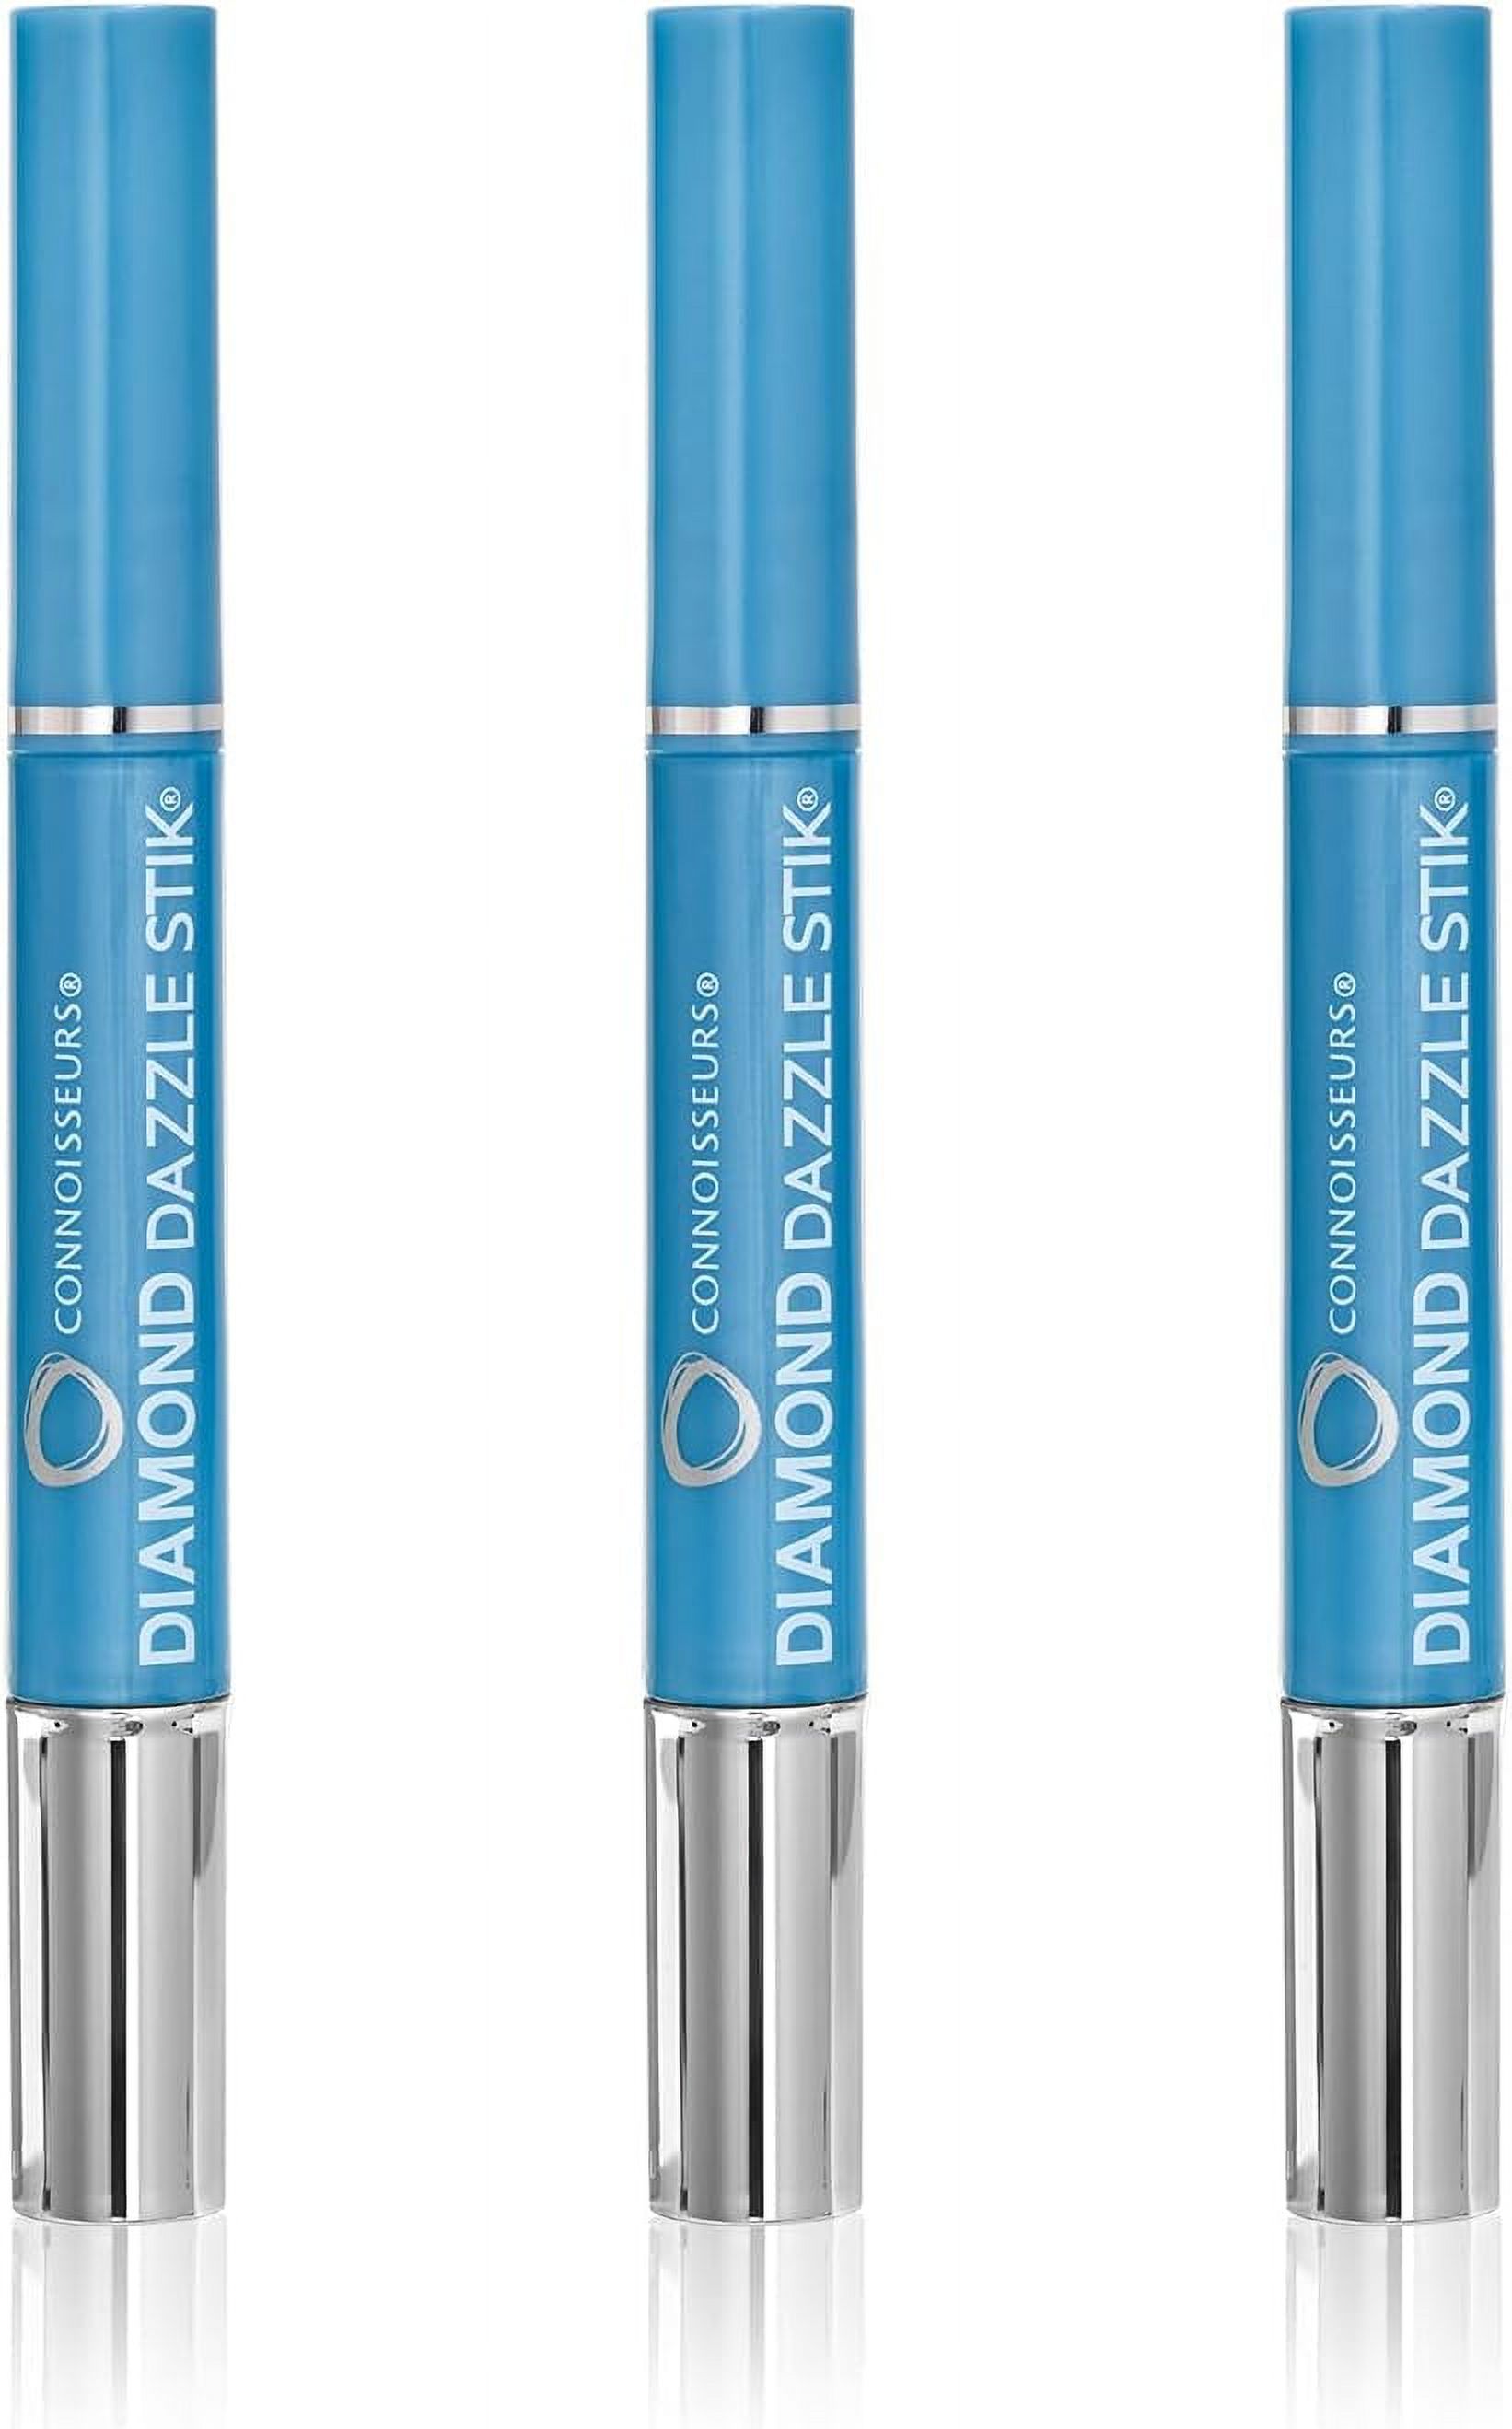 CONNOISSEURS Diamond Dazzle Stik - Portable Diamond Cleaner for Rings and Other Jewelry - Bring Out The Sparkle in Your Diamonds and Precious Stones Dazzle Stik (3 pack) - image 1 of 7